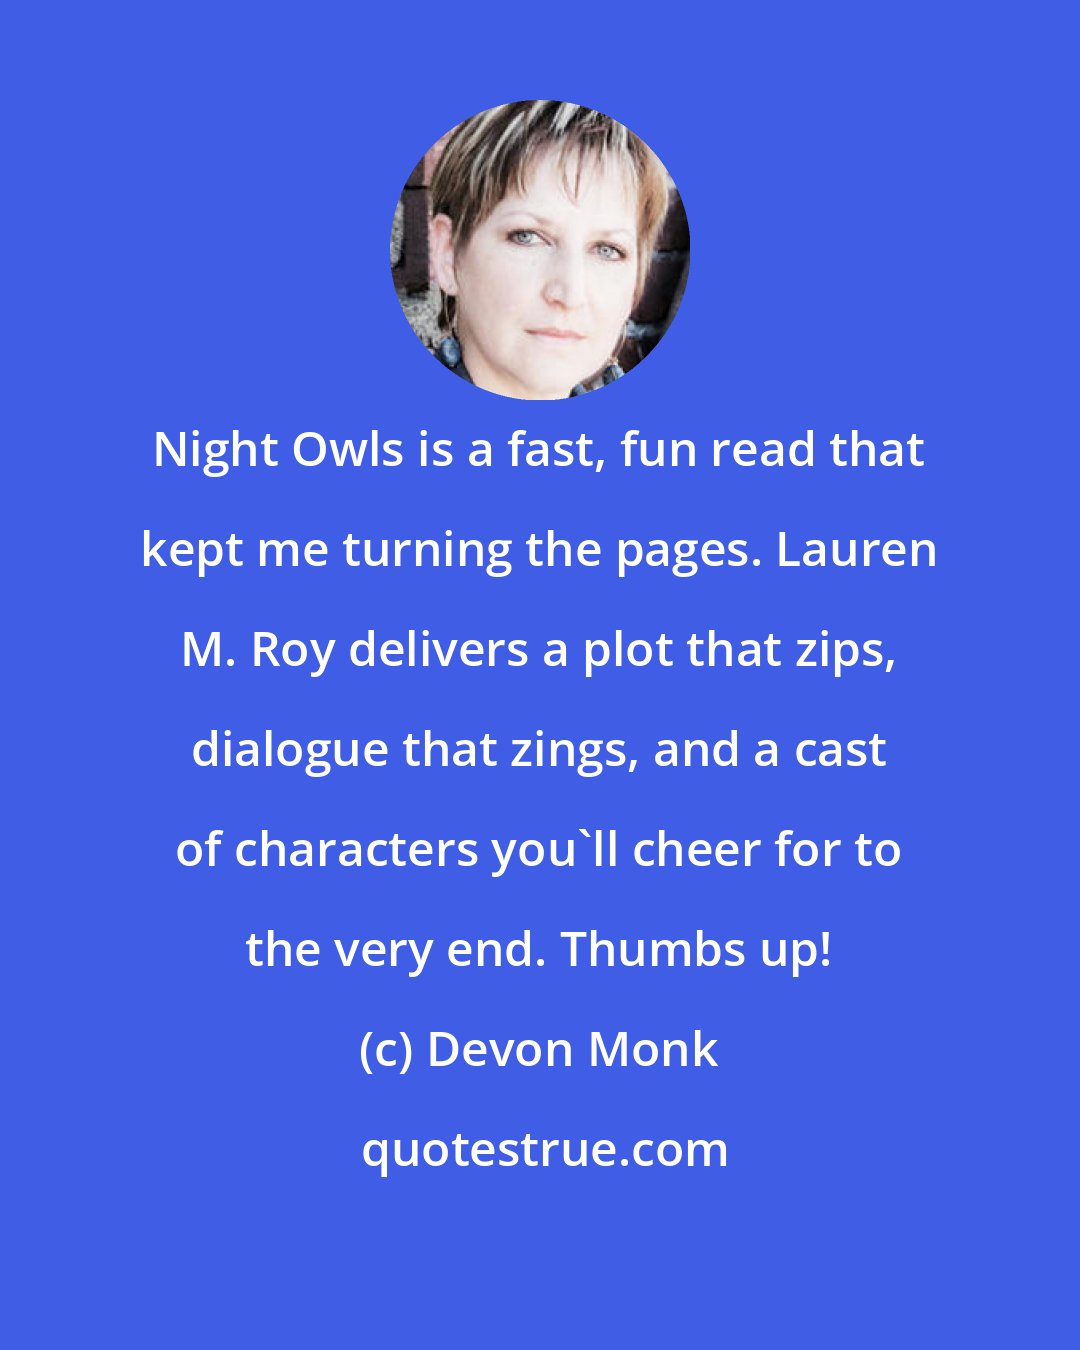 Devon Monk: Night Owls is a fast, fun read that kept me turning the pages. Lauren M. Roy delivers a plot that zips, dialogue that zings, and a cast of characters you'll cheer for to the very end. Thumbs up!